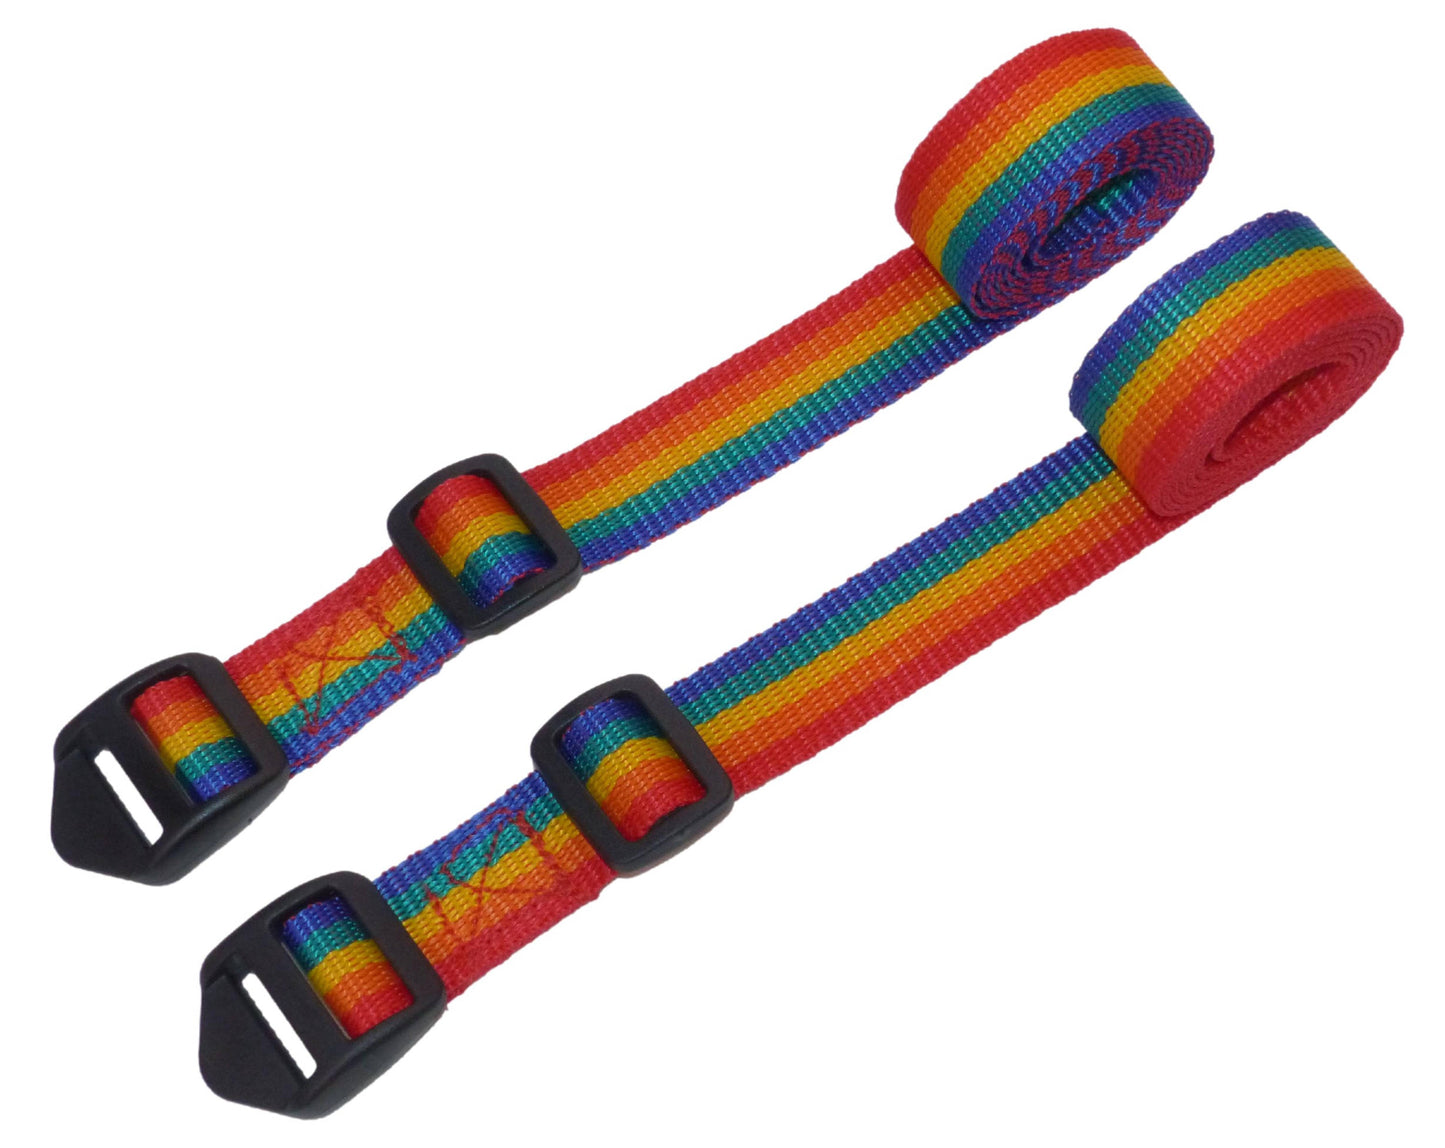 The Benristraps 25mm Camping Straps, 150cm (pair) in rainbow